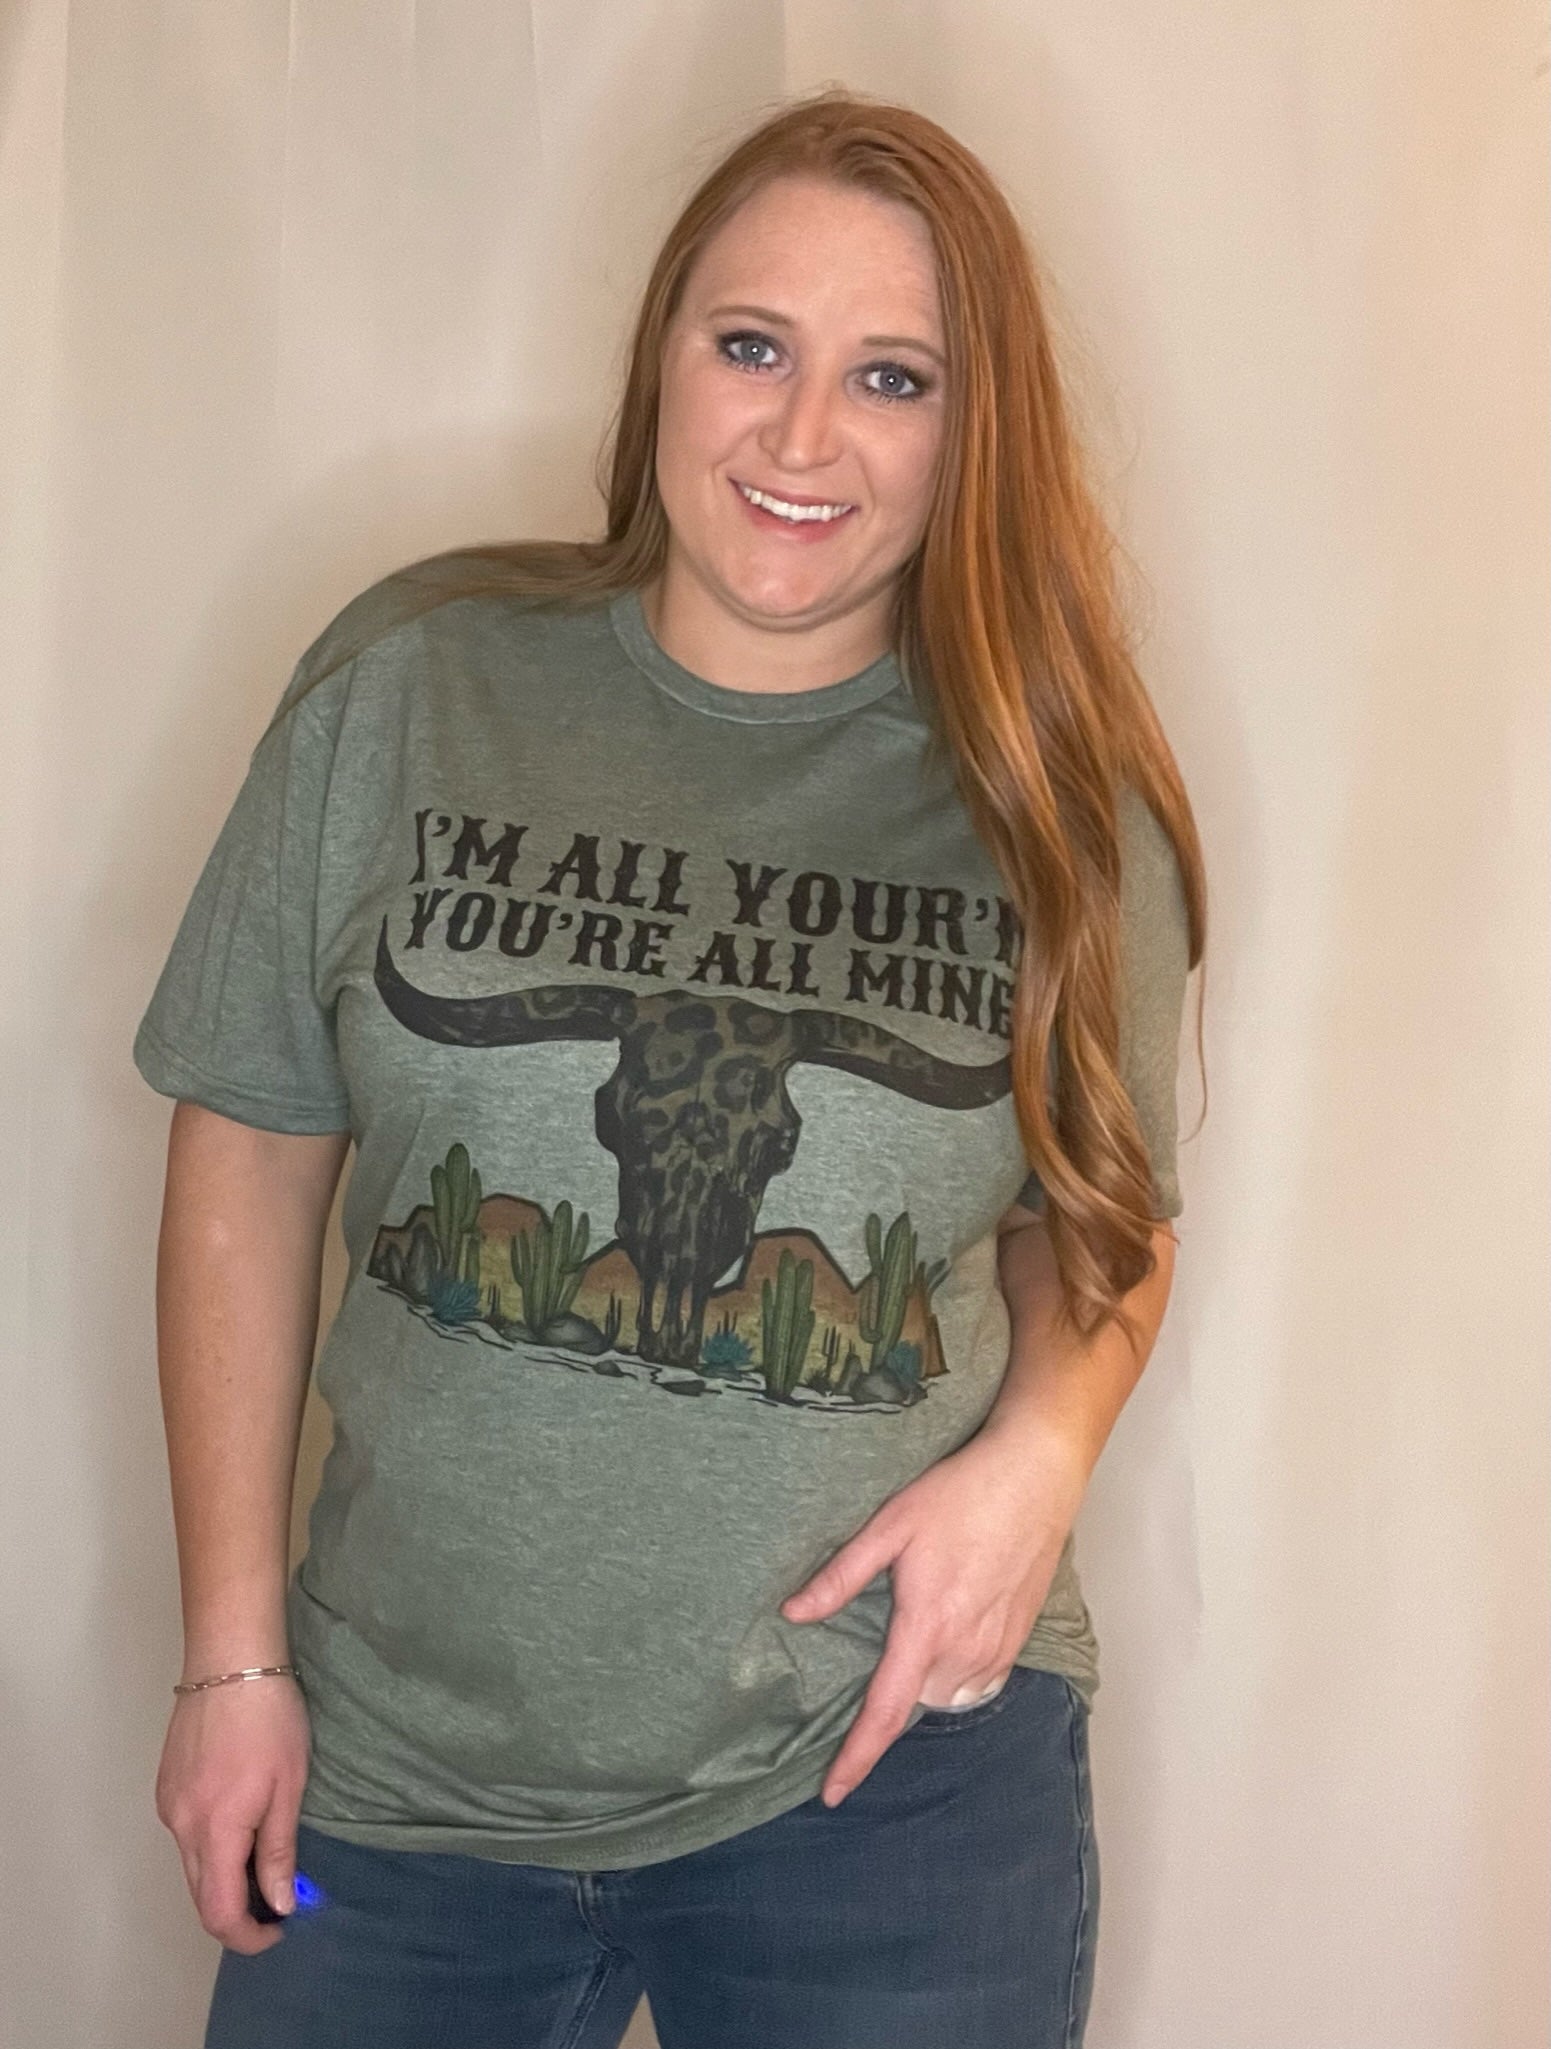 Woman wearing heather olive t-shirt with desert mountains and cactus scene, a cheetah cow skull with horns, and the words "I'm all your'n you're all mine"